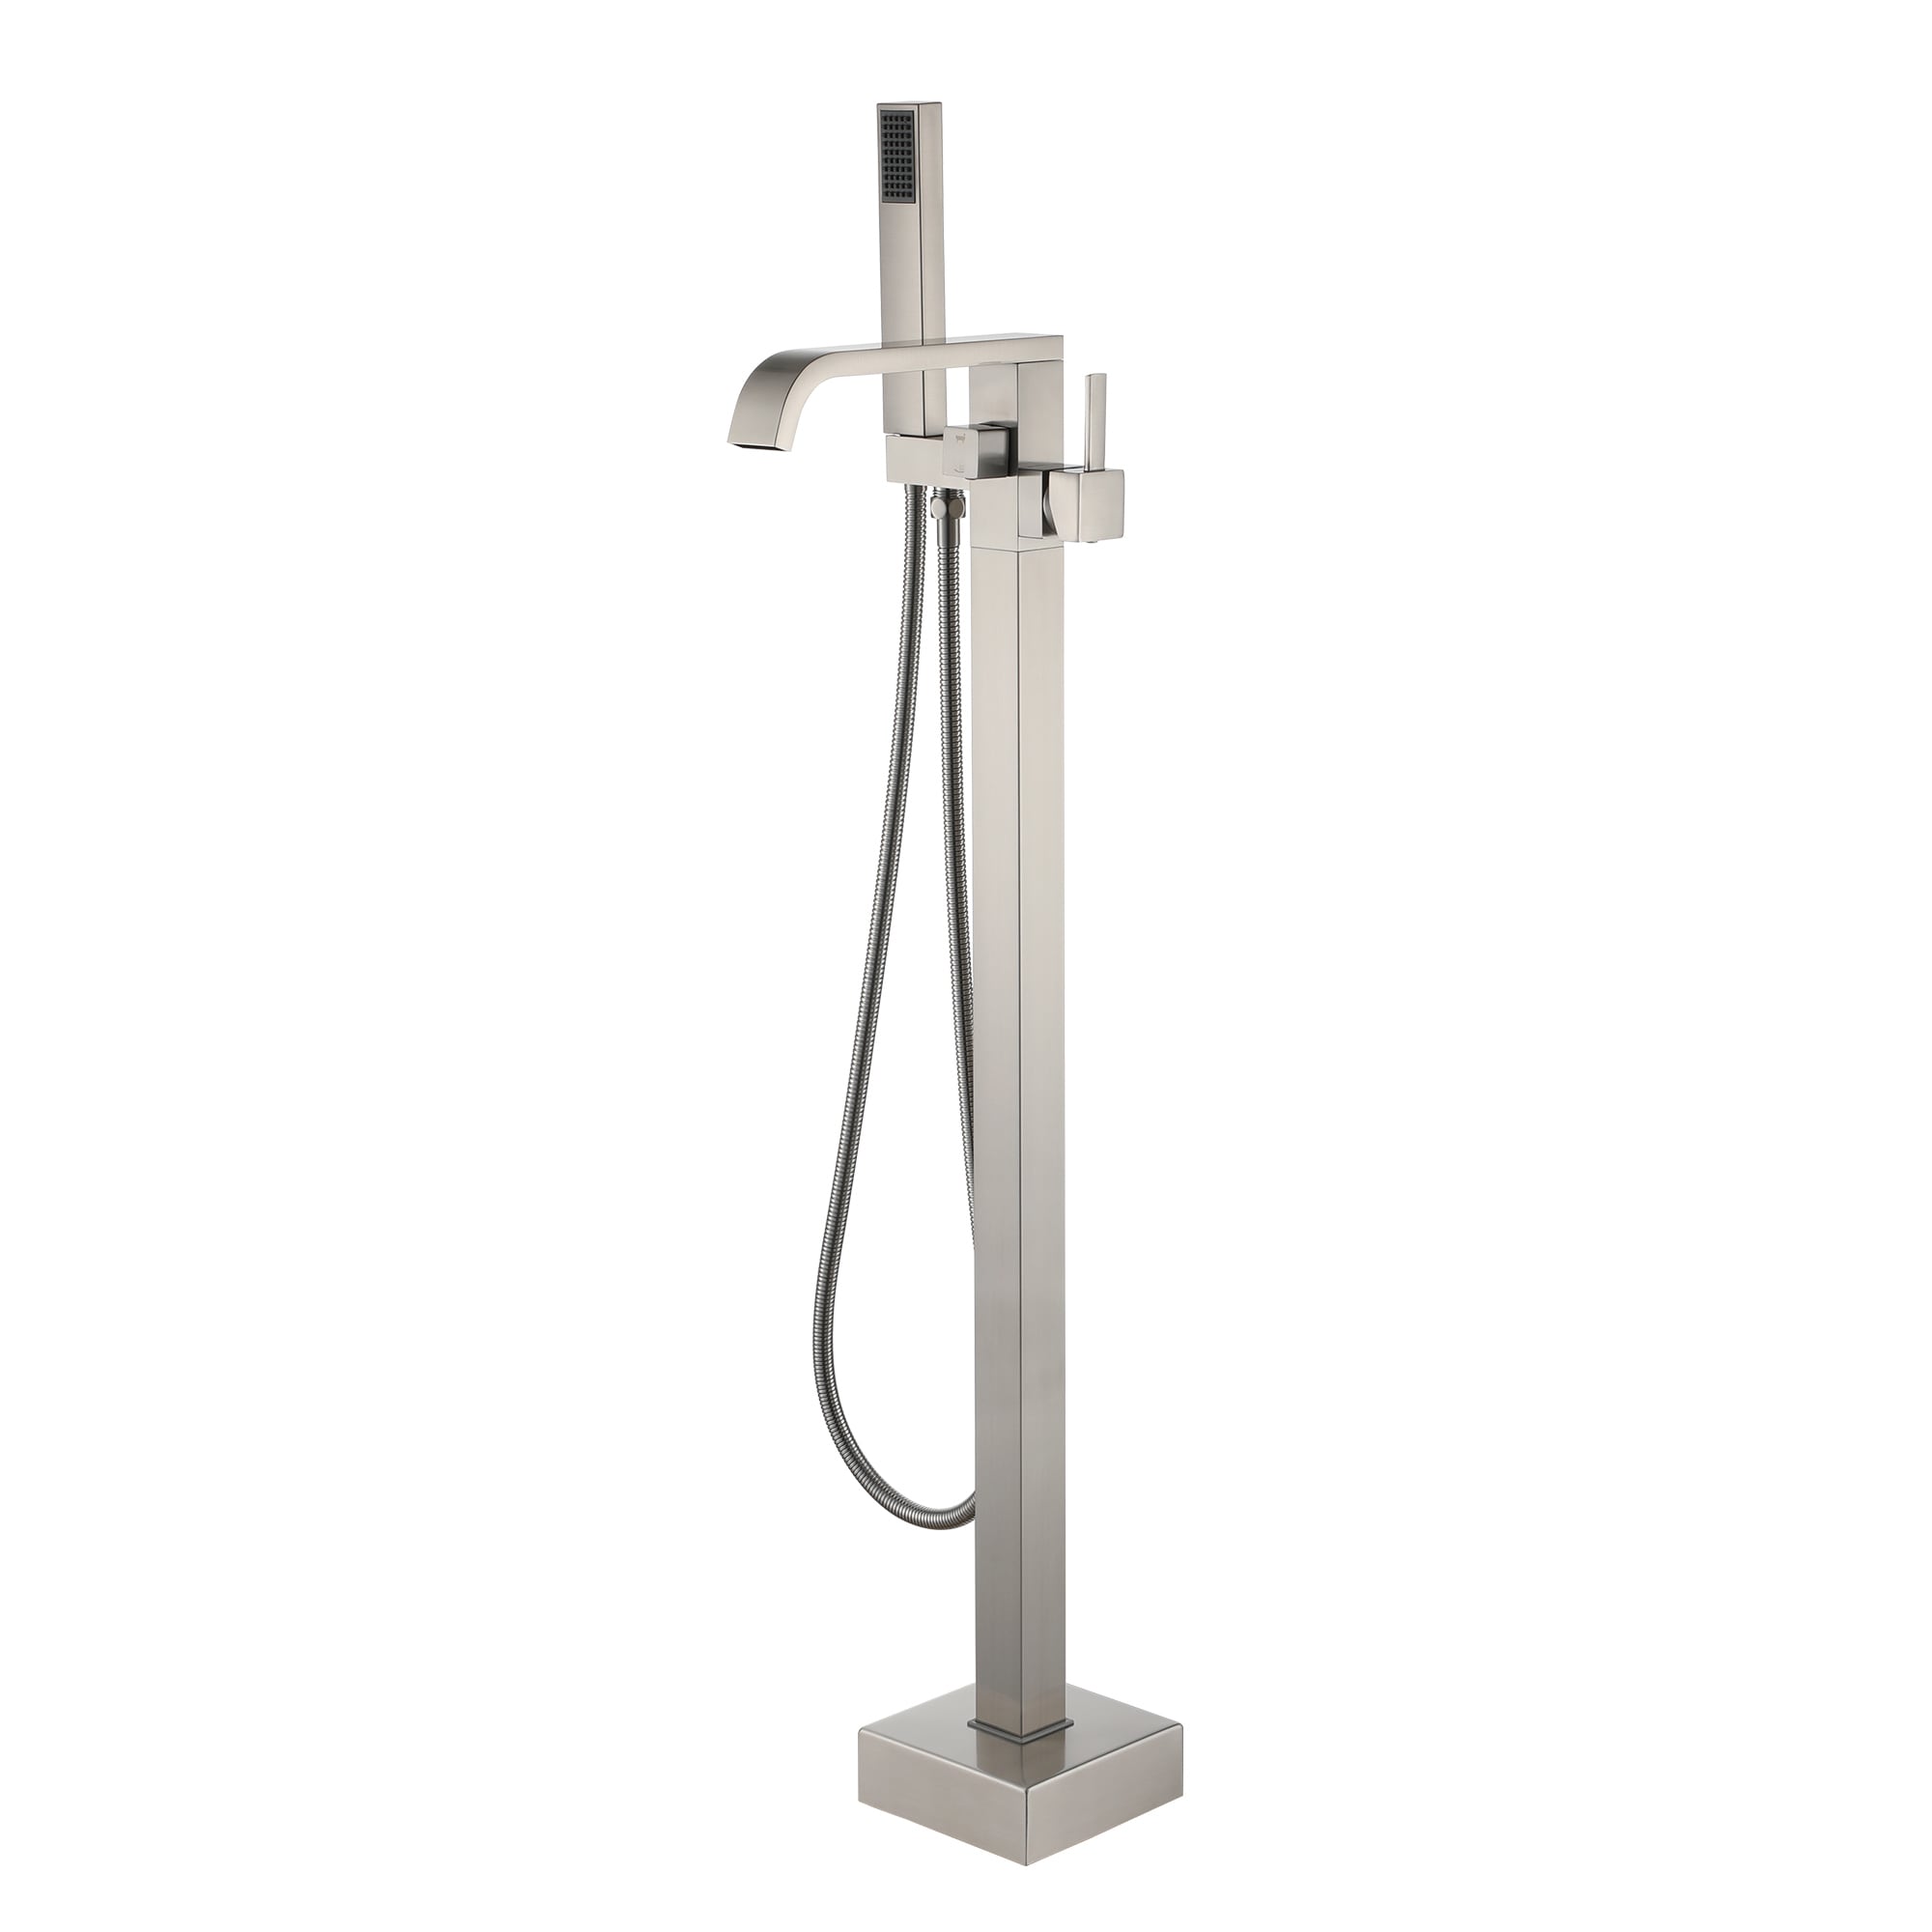 CASAINC Bathtub Faucet Brushed Nickel 1-handle Freestanding Waterfall Bathtub Faucet with Hand Shower (Valve Included)